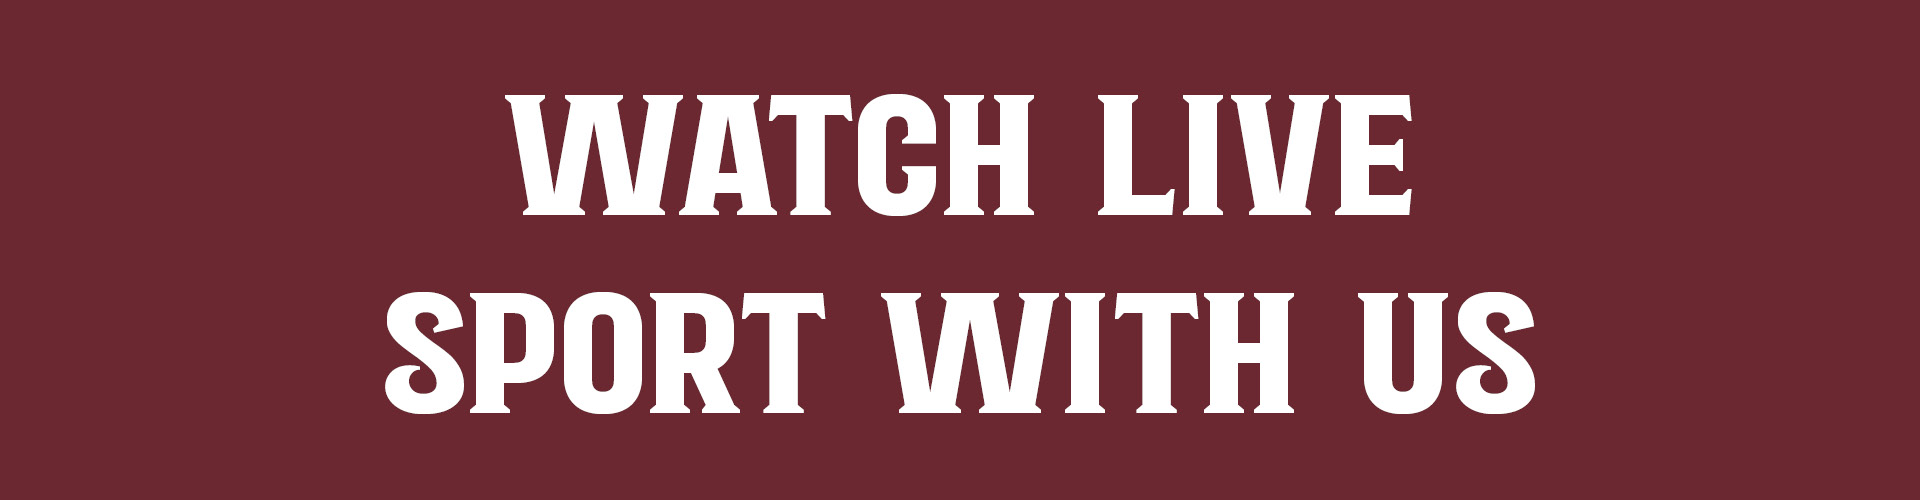 Watch live sport in Thame at The Birdcage Inn pub